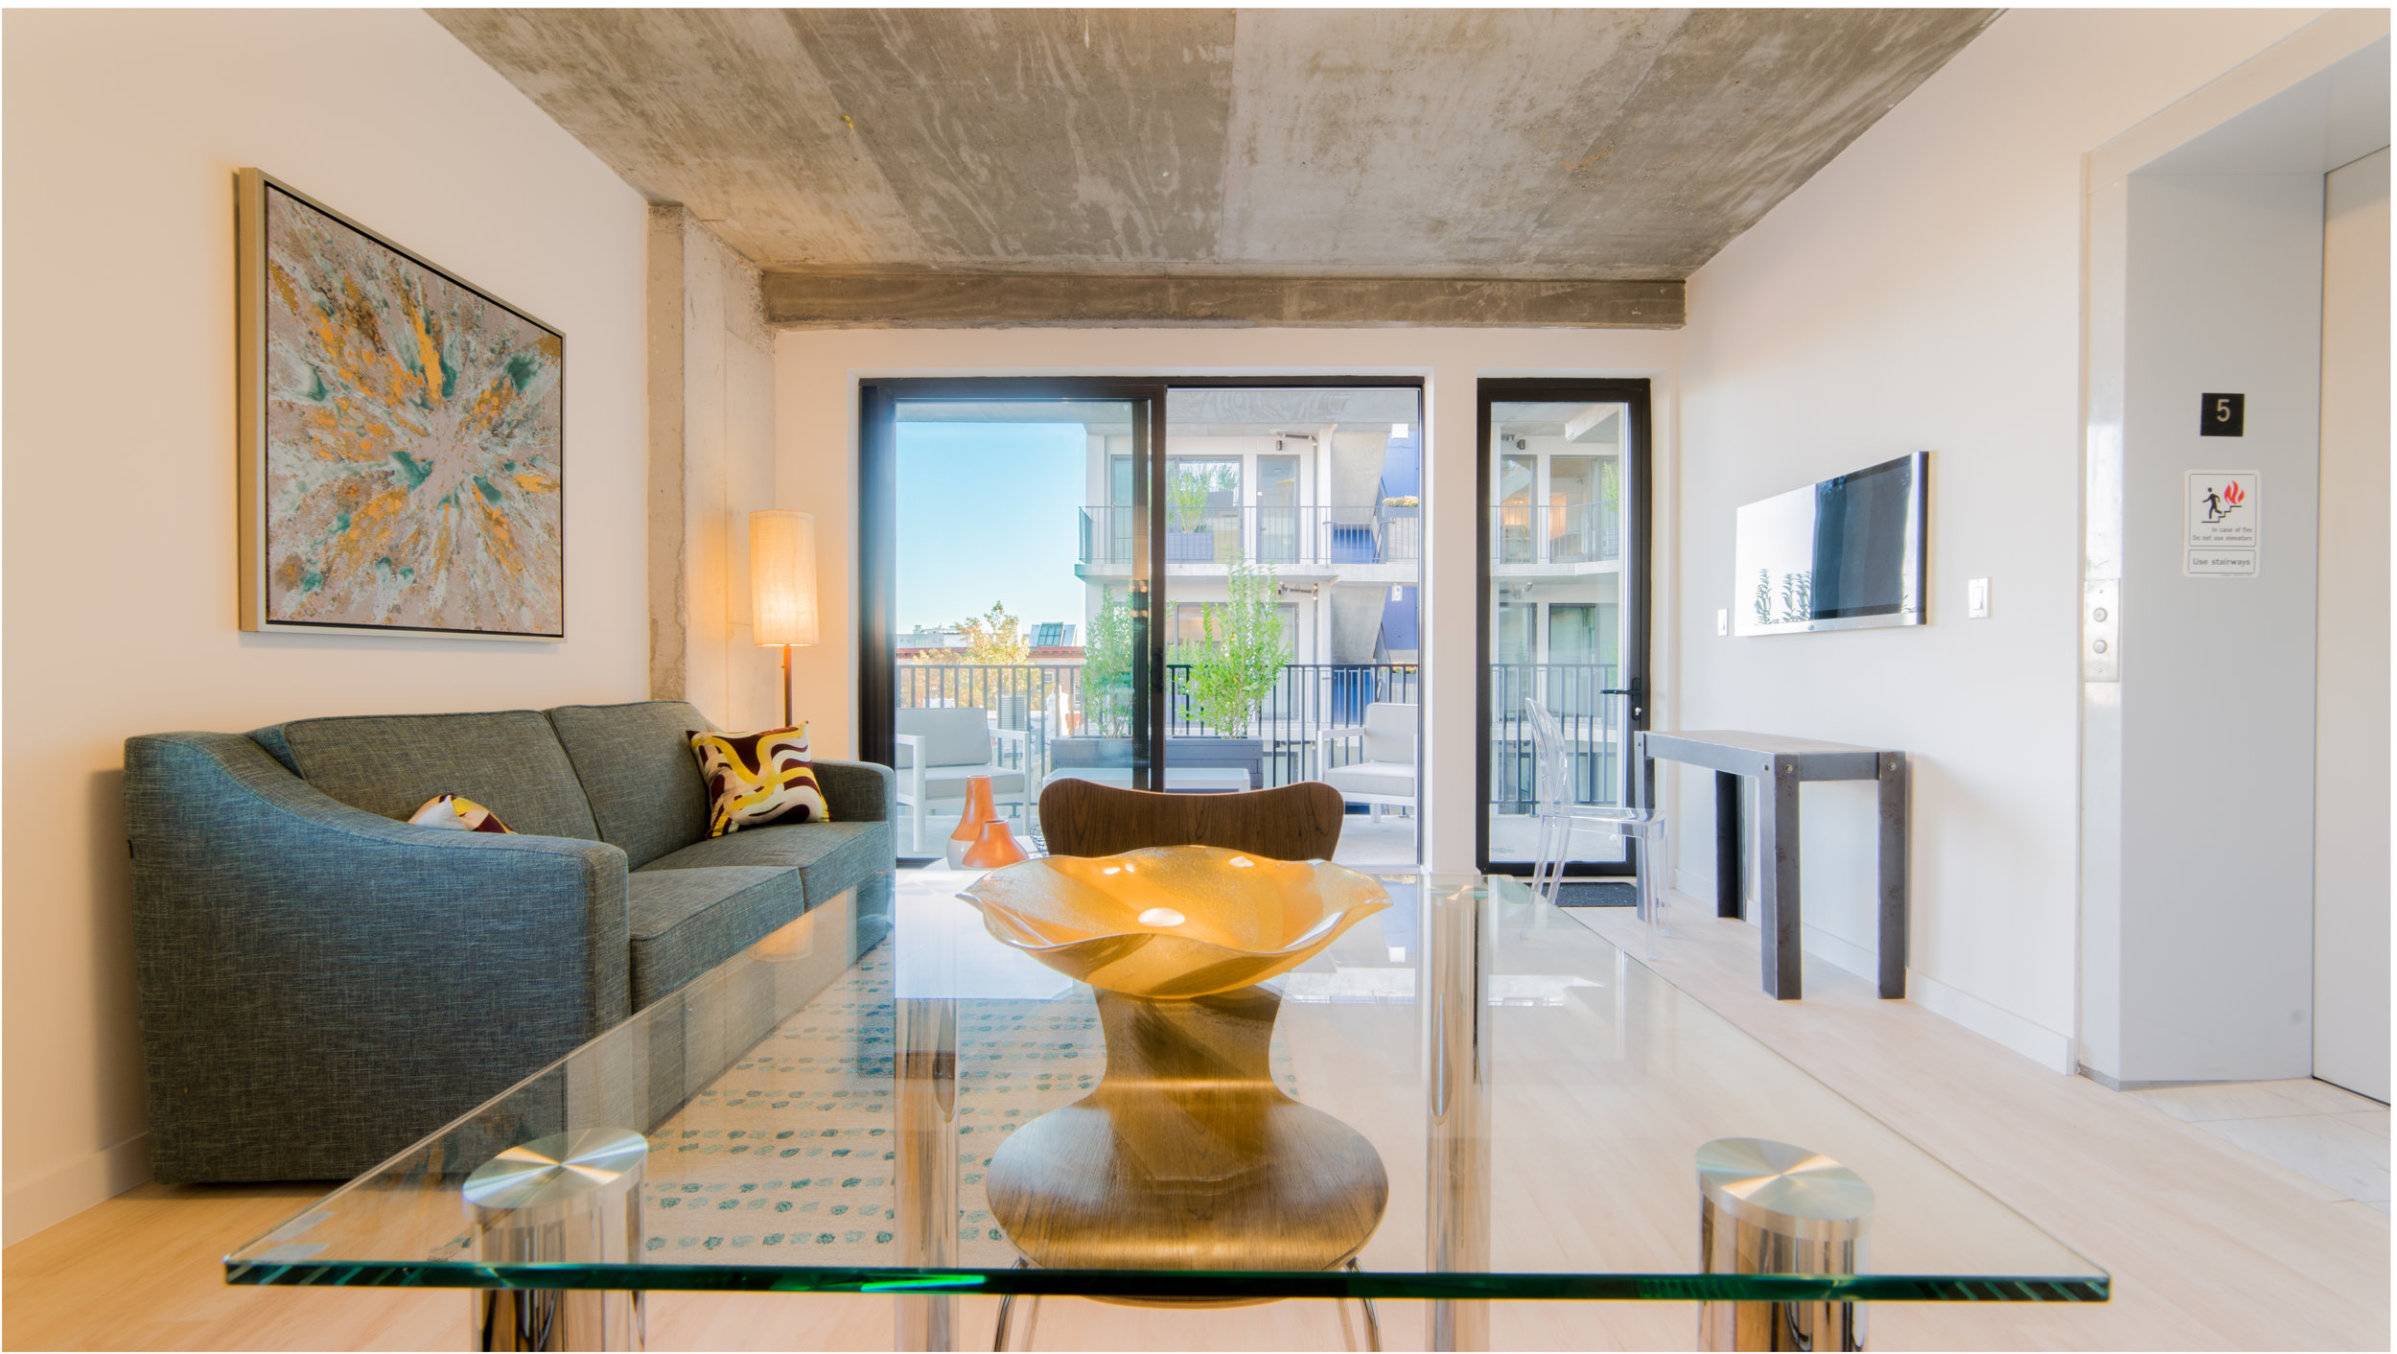 2 MONTHS FREE AND 1 MONTH OP A sublime duplex penthouse boasting pristine finishes and a glut of private outdoor spaces, this 3 bedroom, 2 bathroom home is a paradigm ...